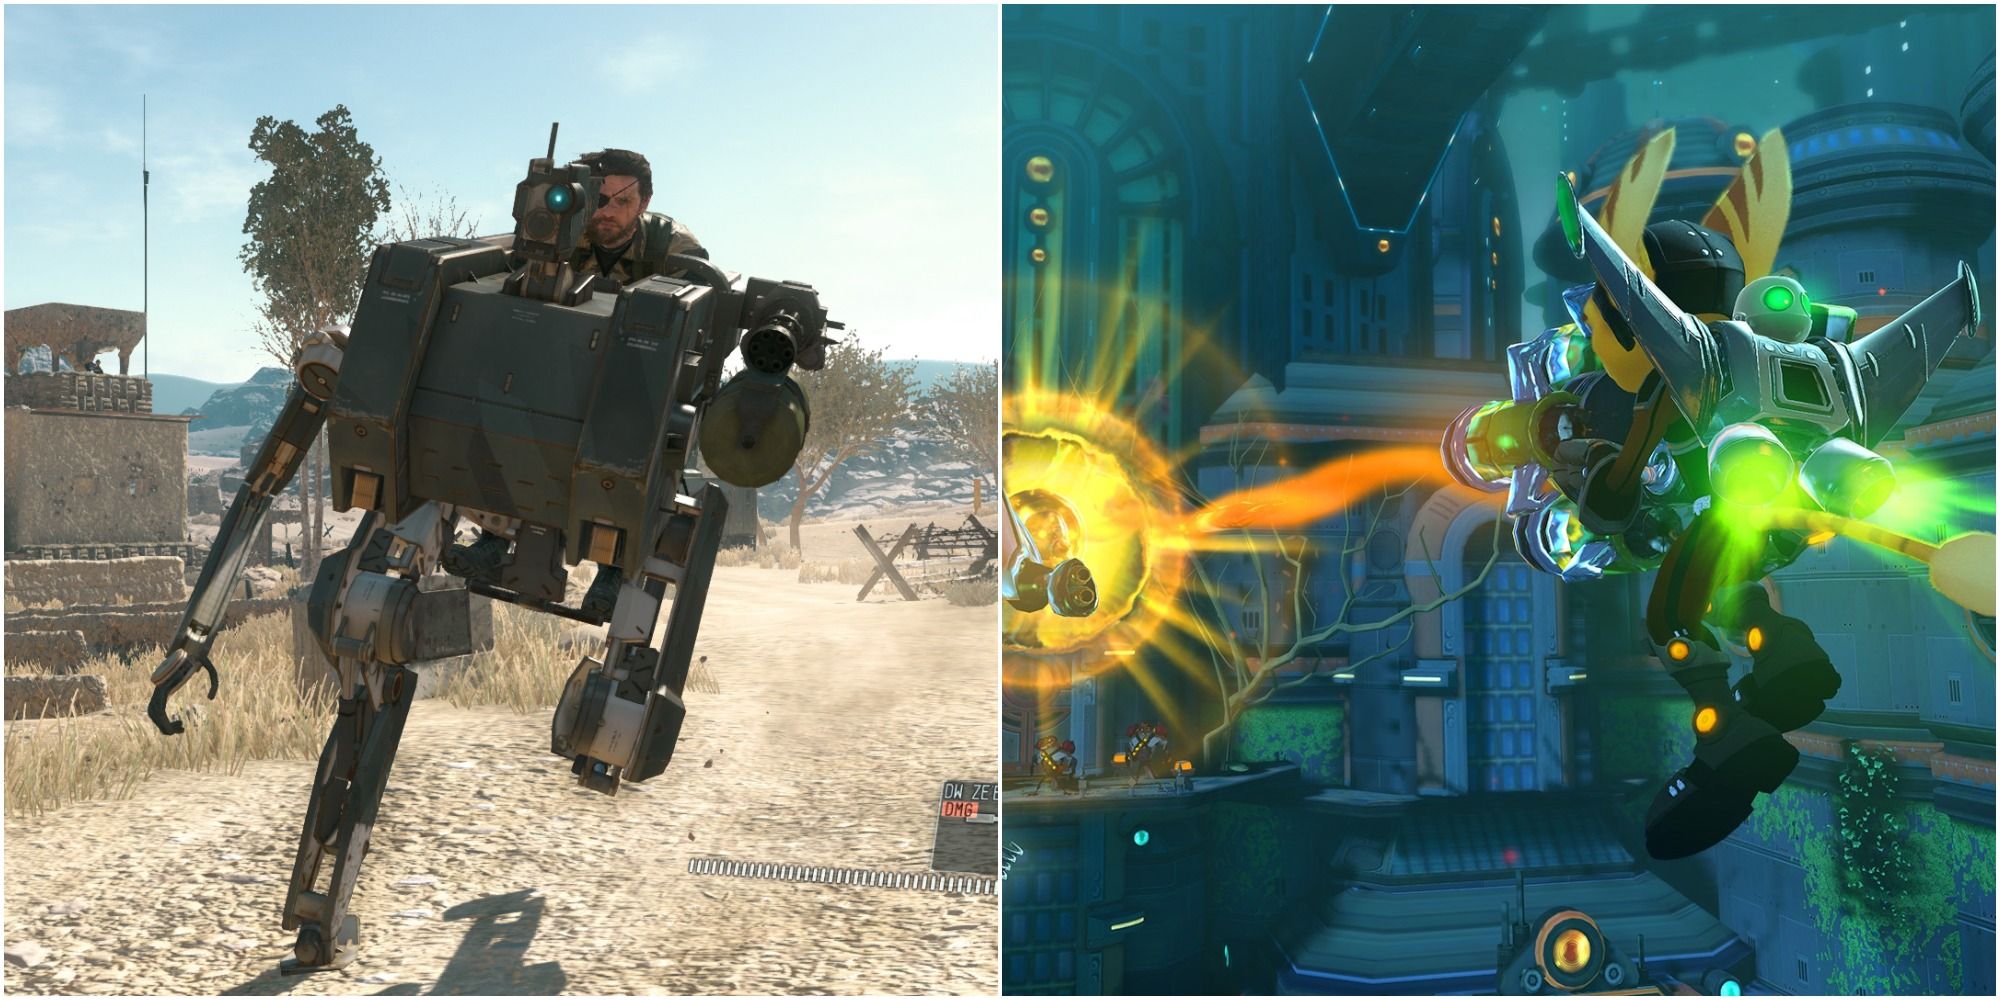 Riding A Robot In Metal Gear Solid 5 - Ratchet Using Clank To Glide As They Shoot At An Enemy